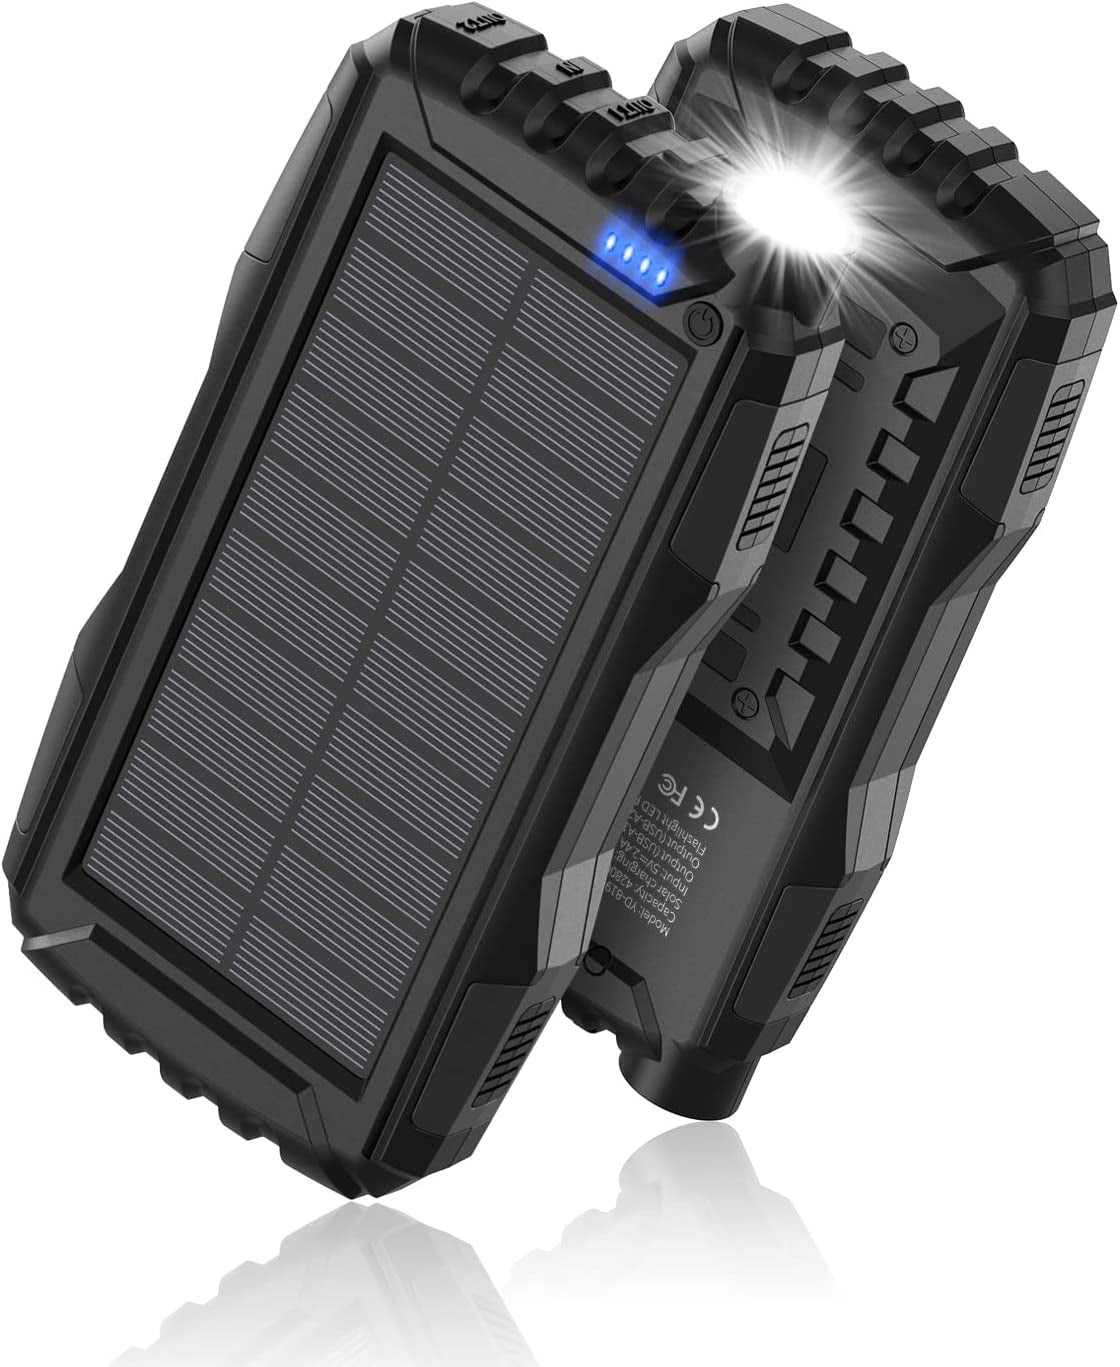 Solar PowerBank - 42800Mah solar battery charger with a built in bright flashlight